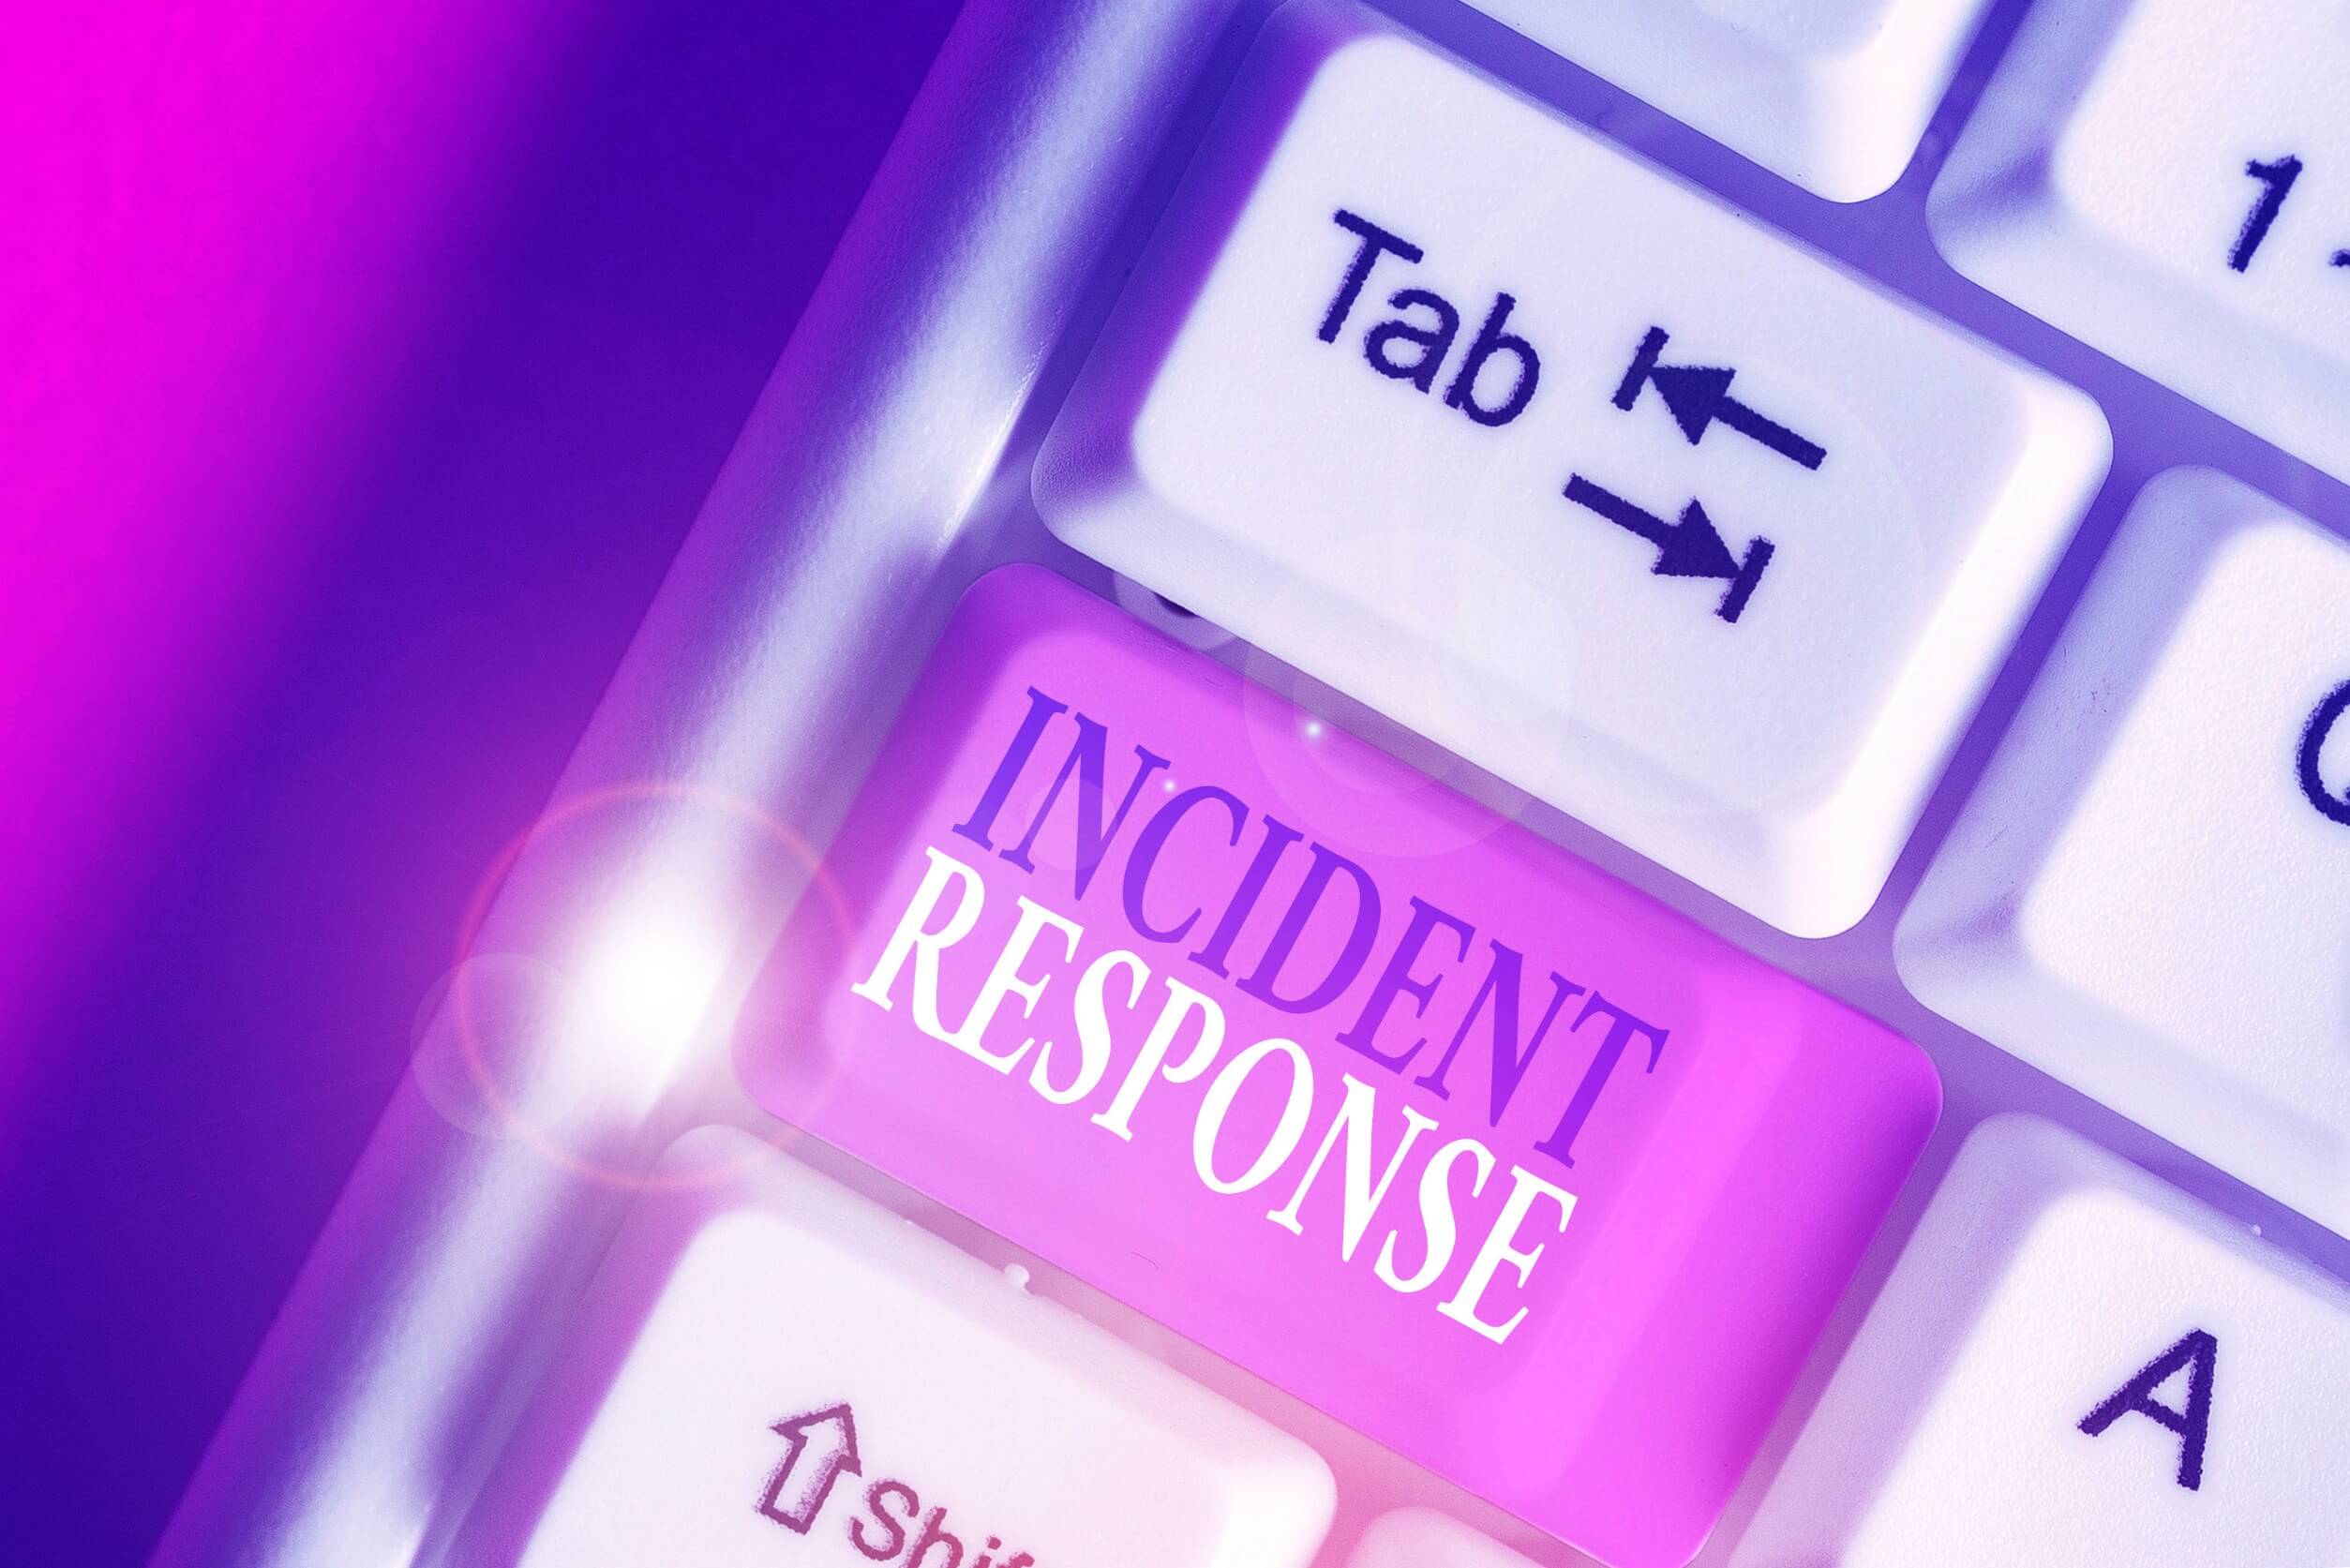 How to create an Incident Response Playbook?